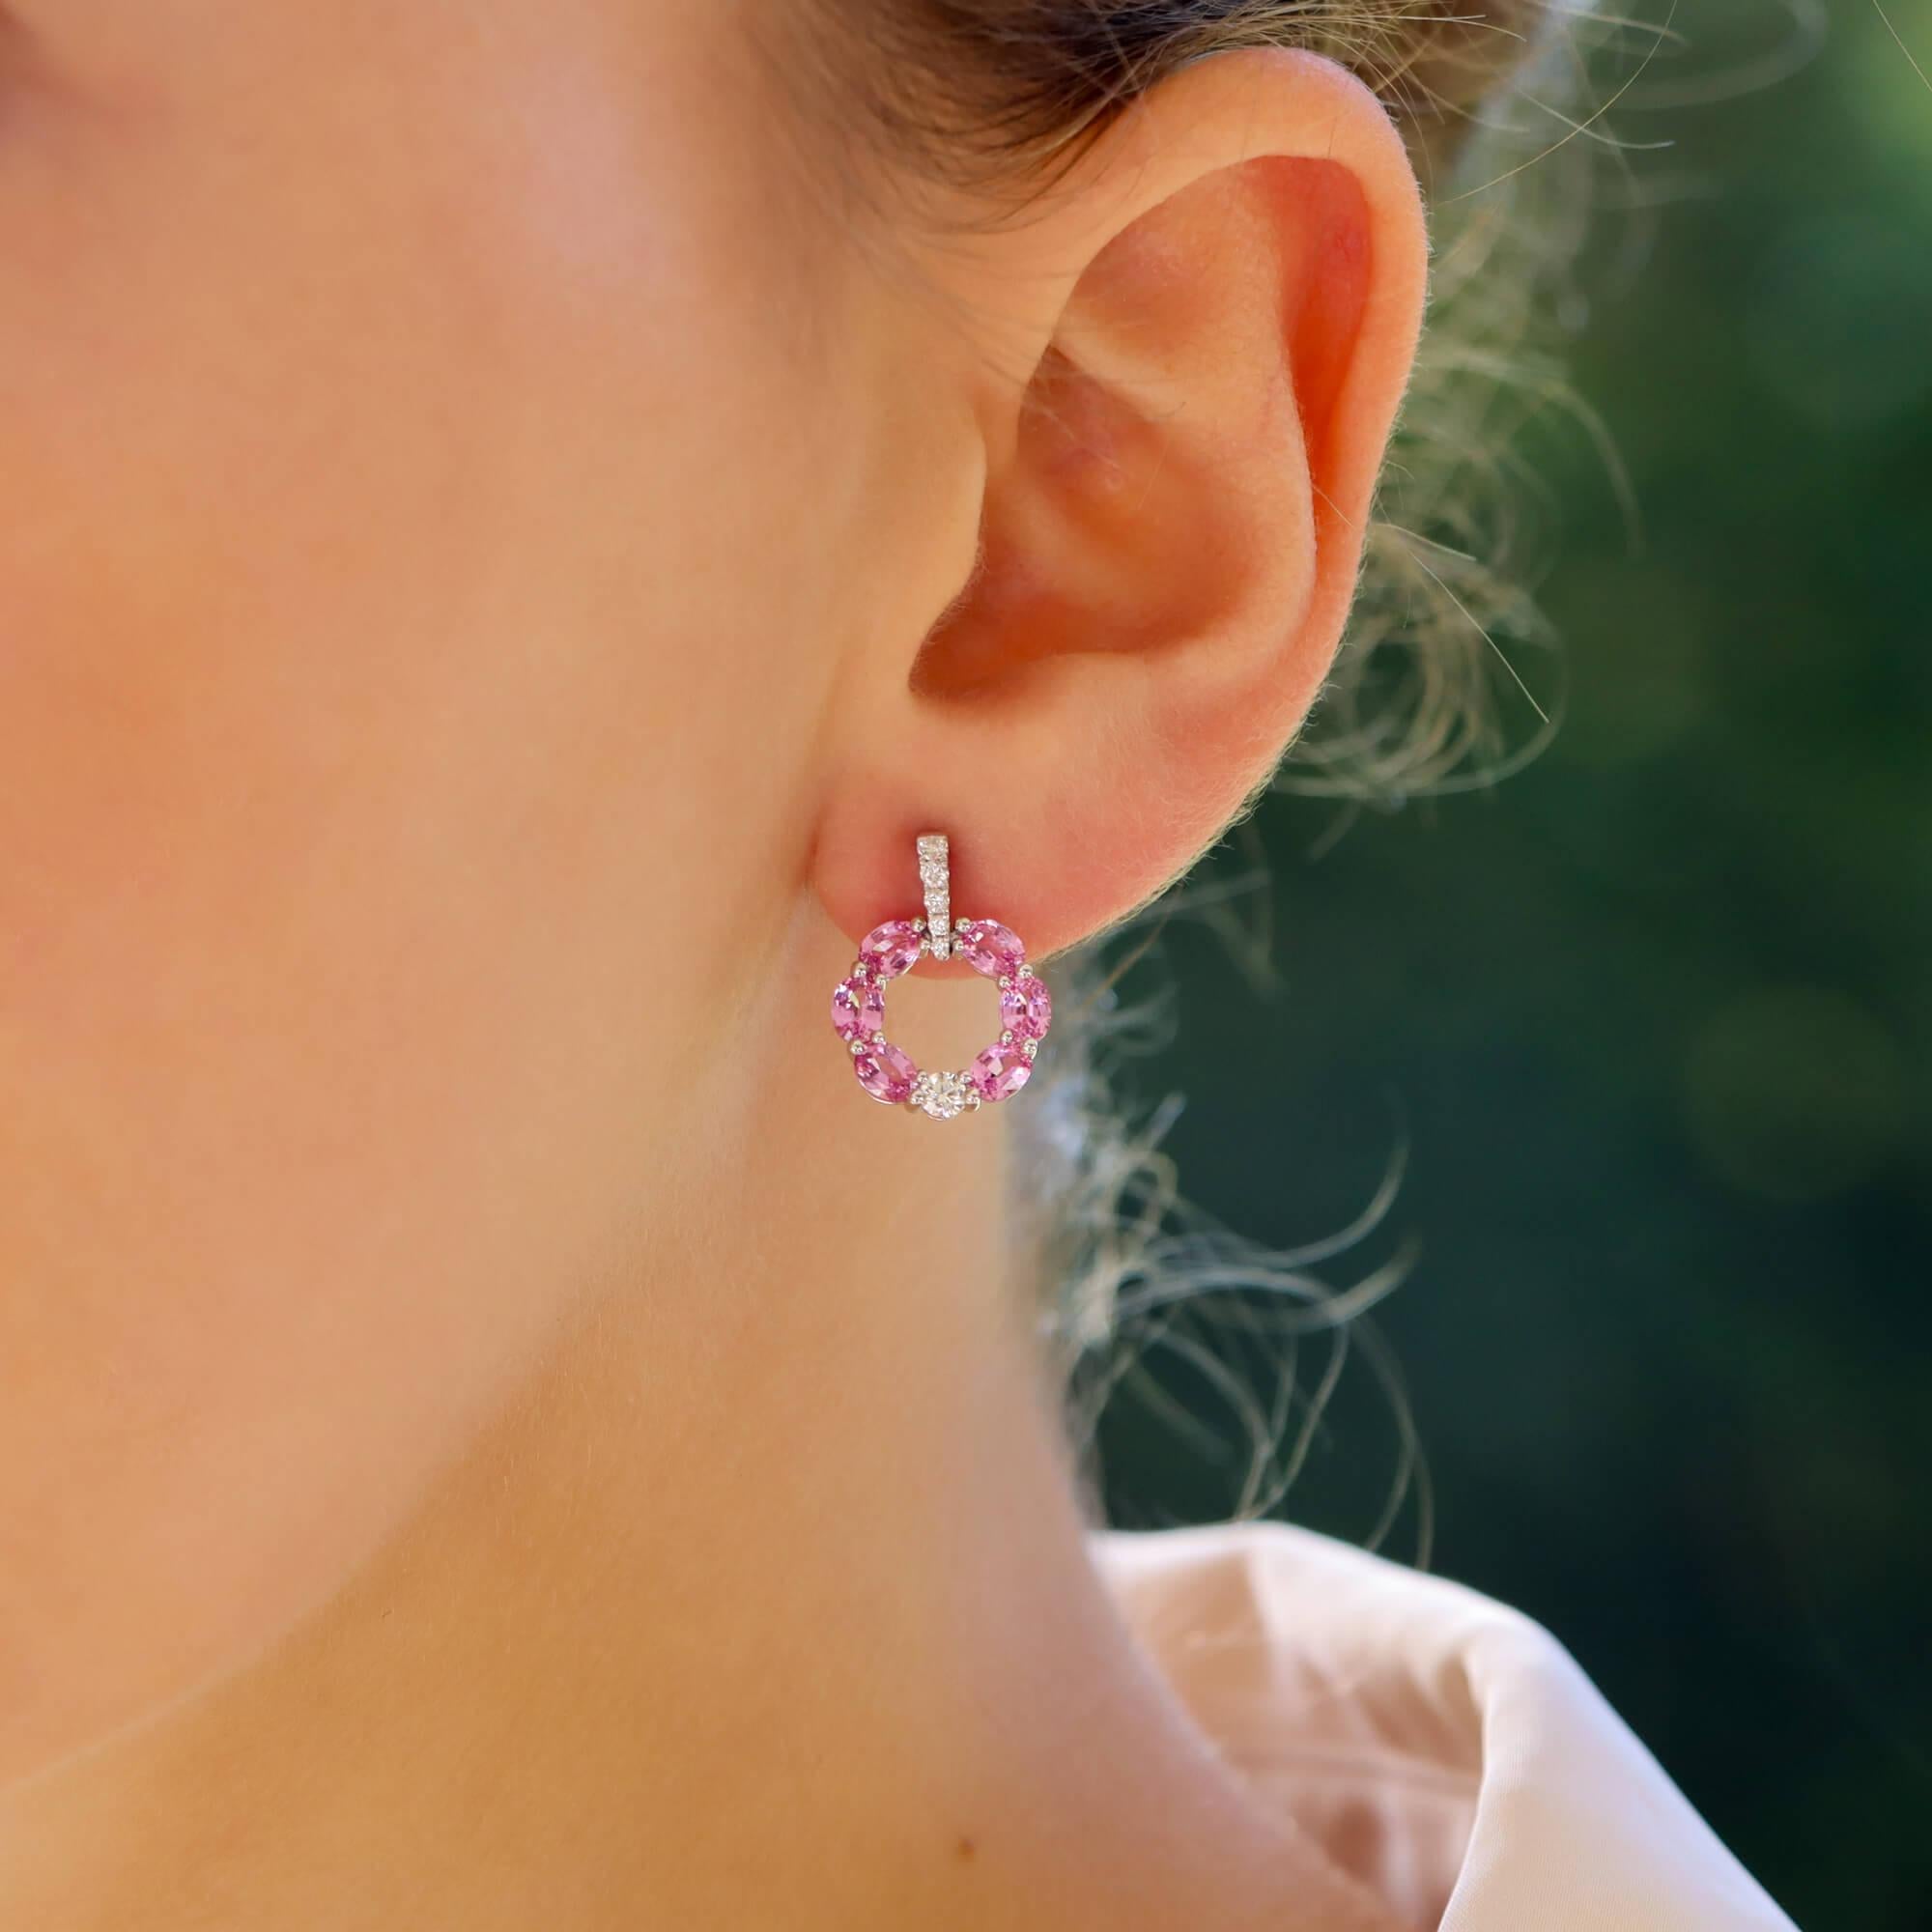 A beautiful pair of pastel pink sapphire and diamond circular drop earrings set in 18k white gold.

The earrings are predominantly set with a white gold hoop, set throughout with oval cut pastel pink sapphires; all of which are perfectly matched in